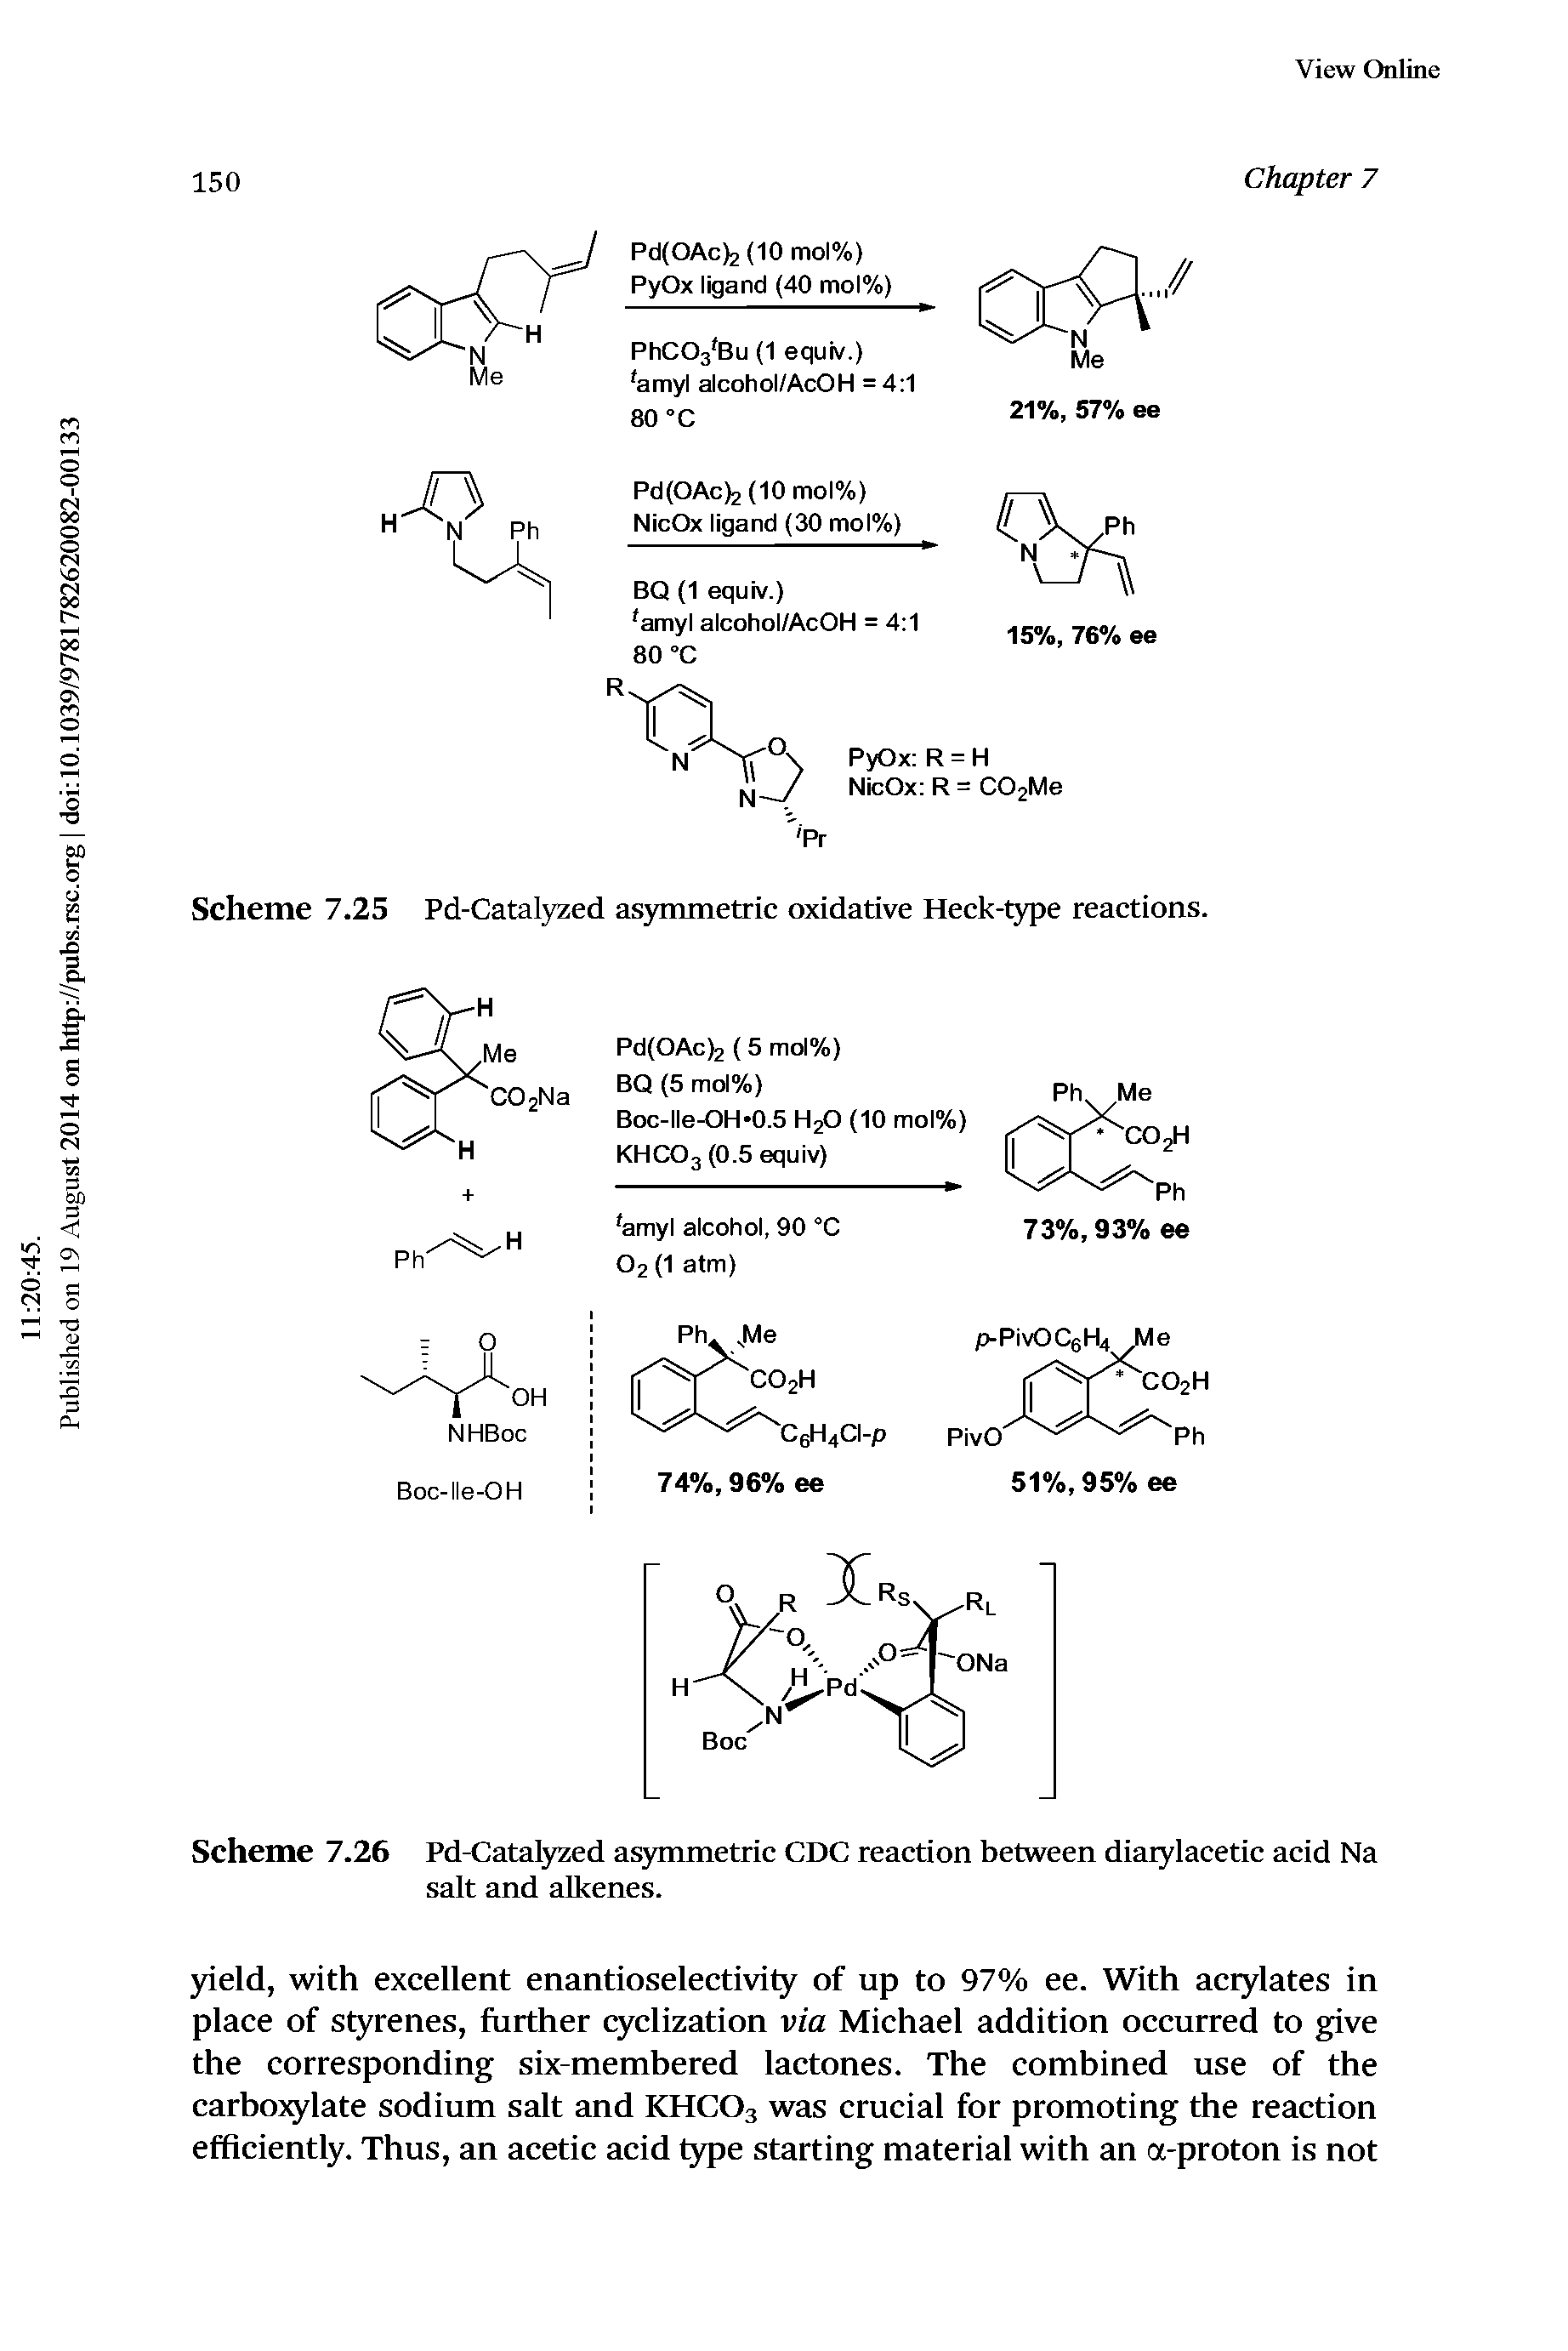 Scheme 7.26 Pd-Catafyzed as3qnmetric CDC reaction between diarylacetic acid Na salt and aUcenes.